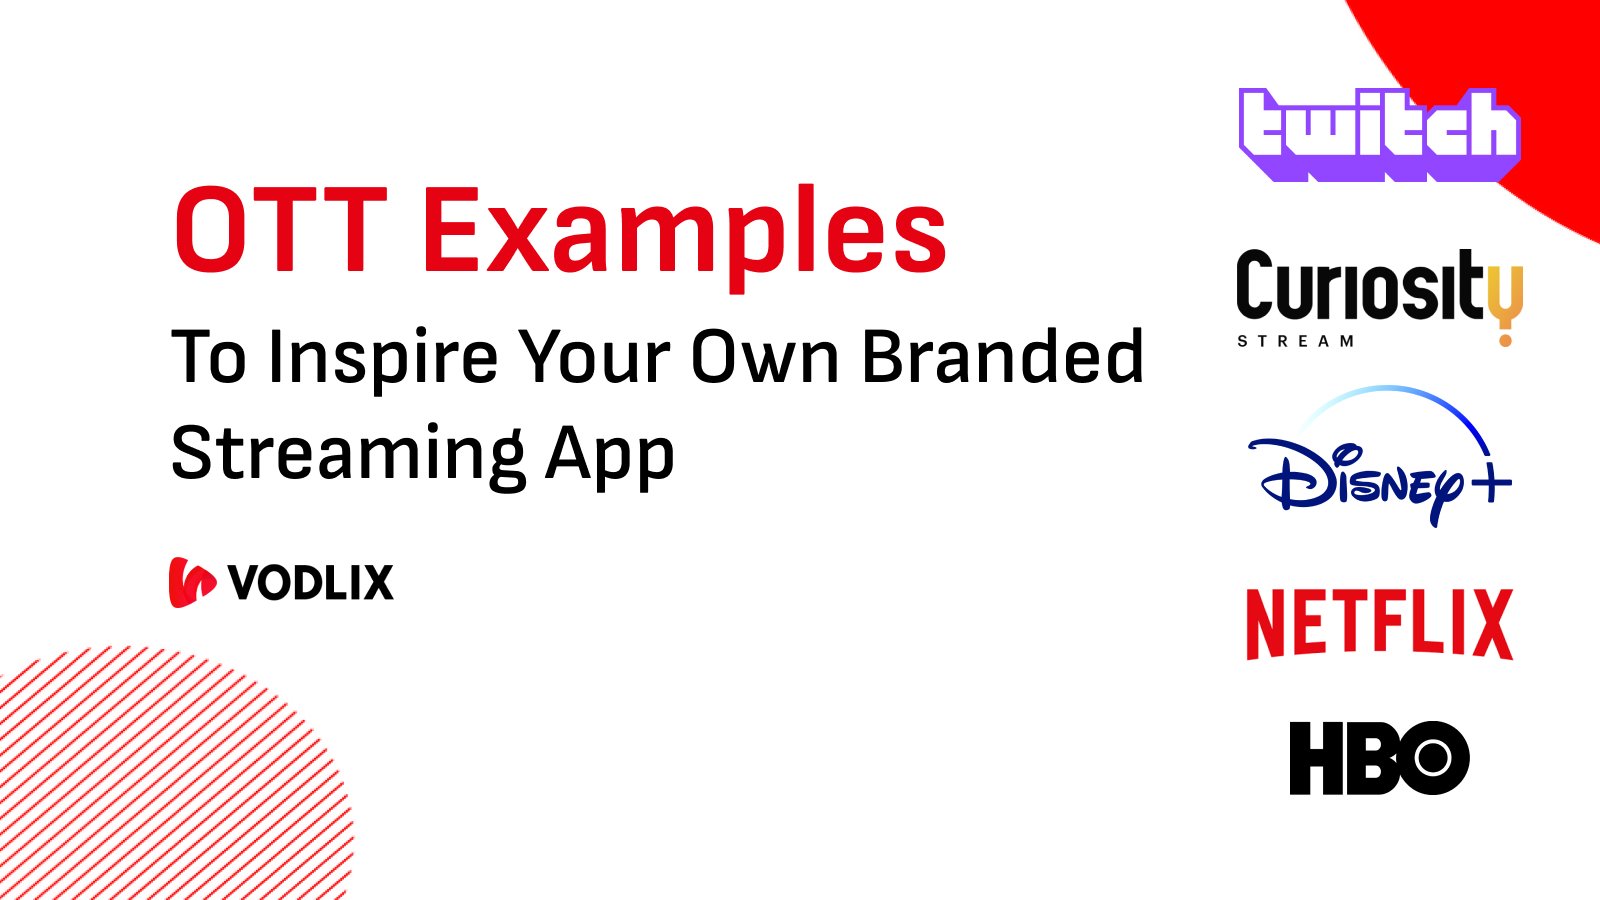 OTT Examples to Inspire Your Own Branded Streaming App